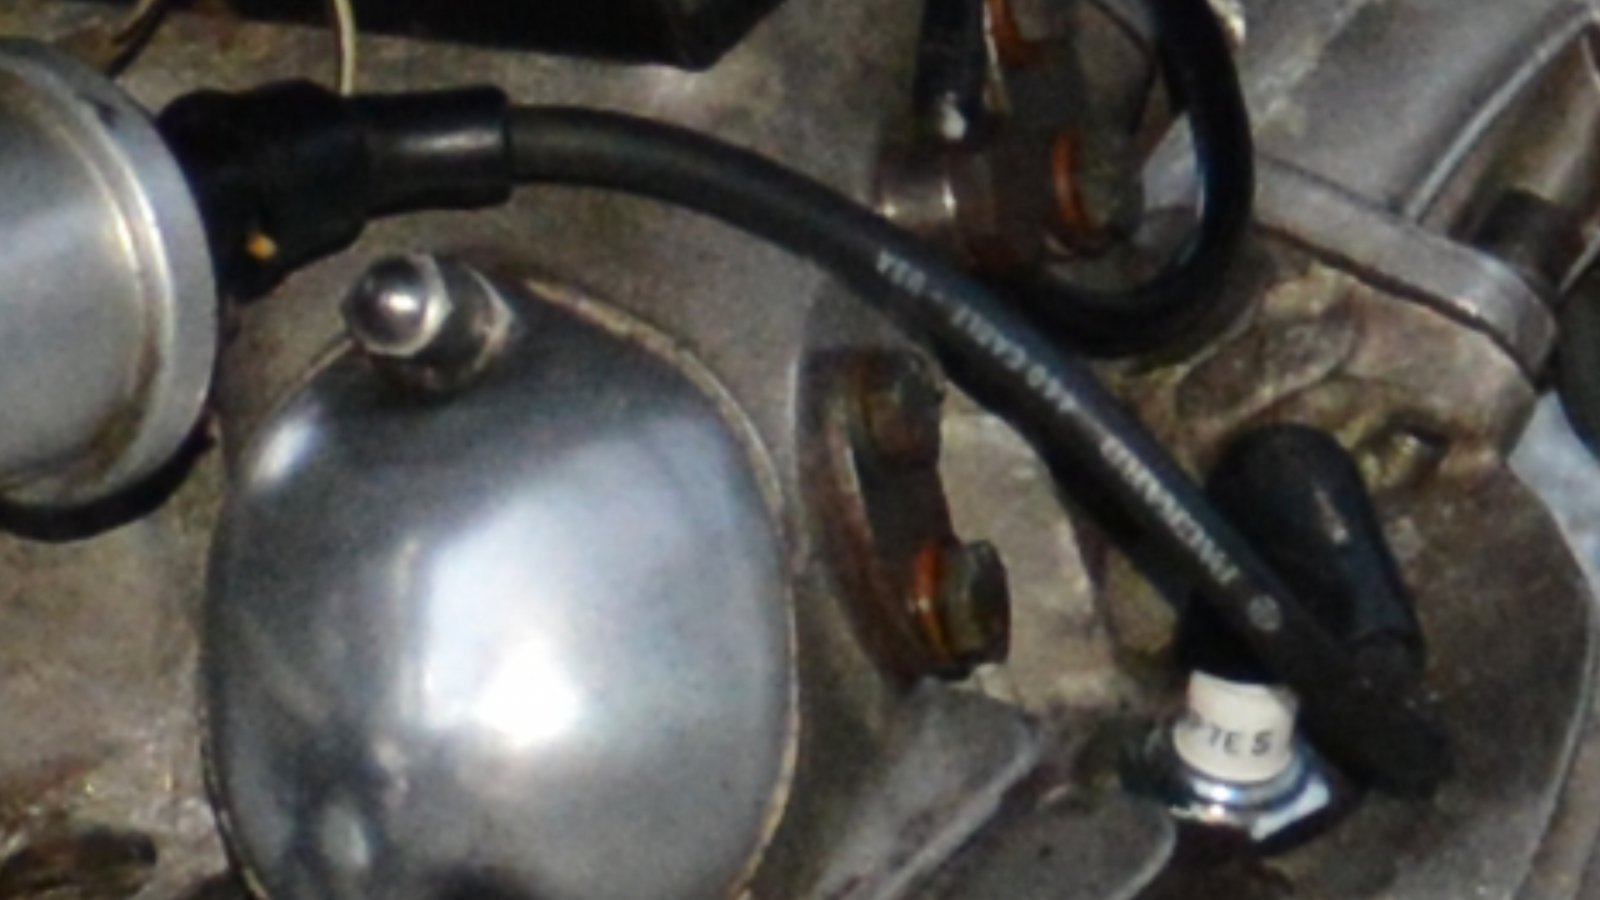 ??? - spark plug wires - what are you folks doing?